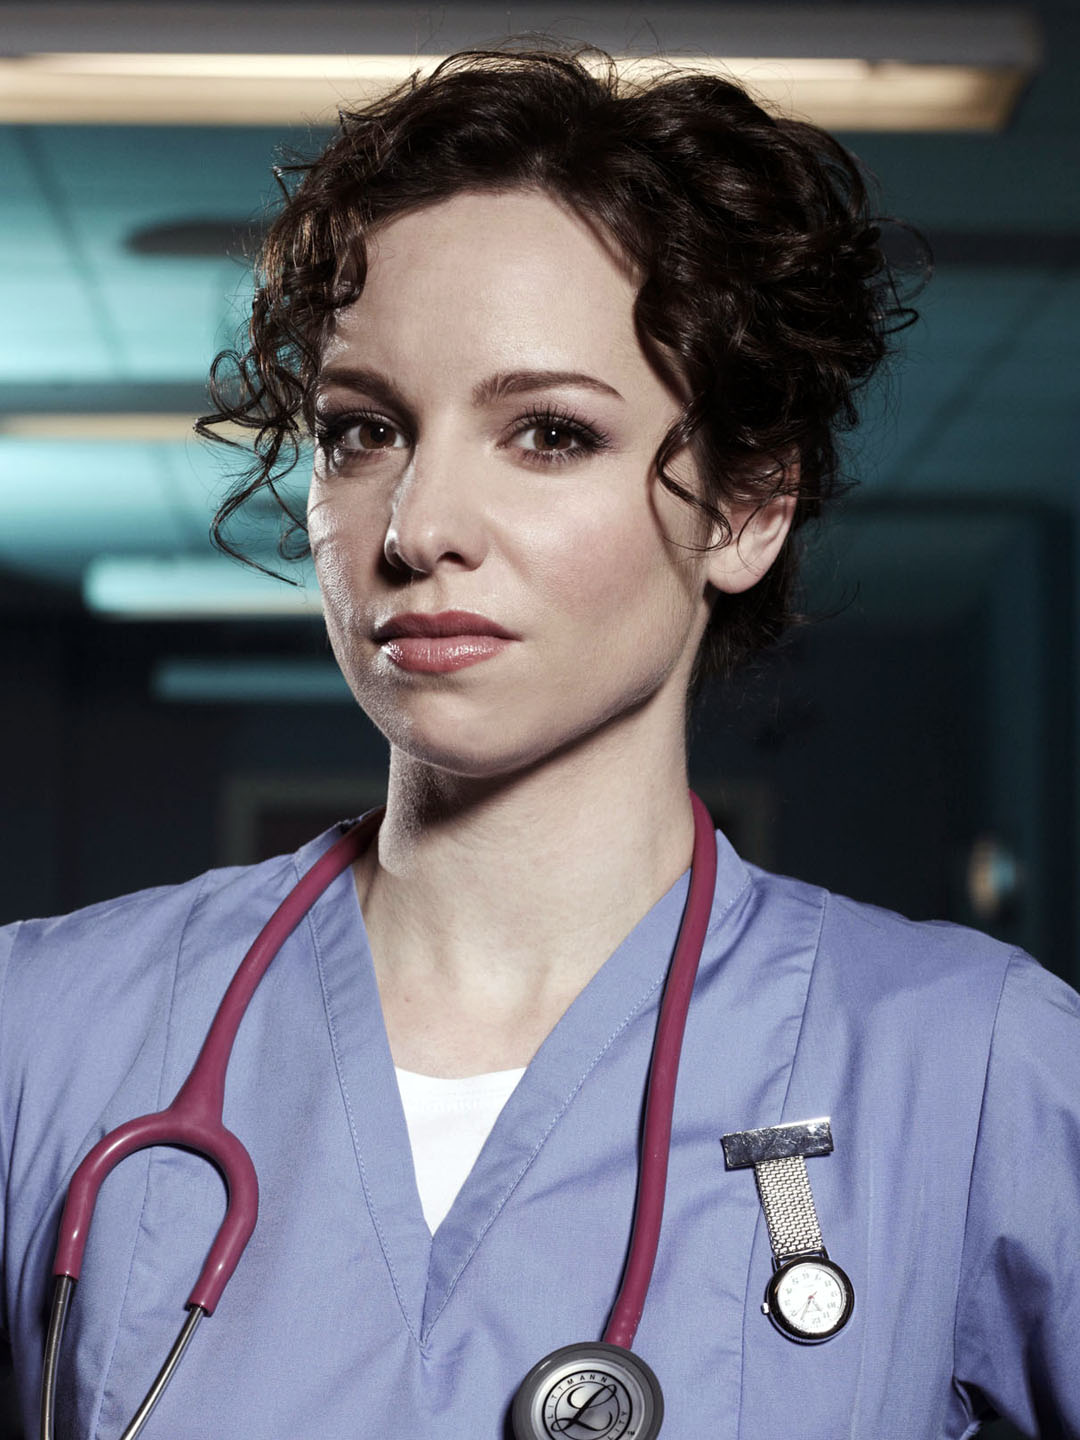 Kirsty Clements | Casualty Central | FANDOM powered by Wikia